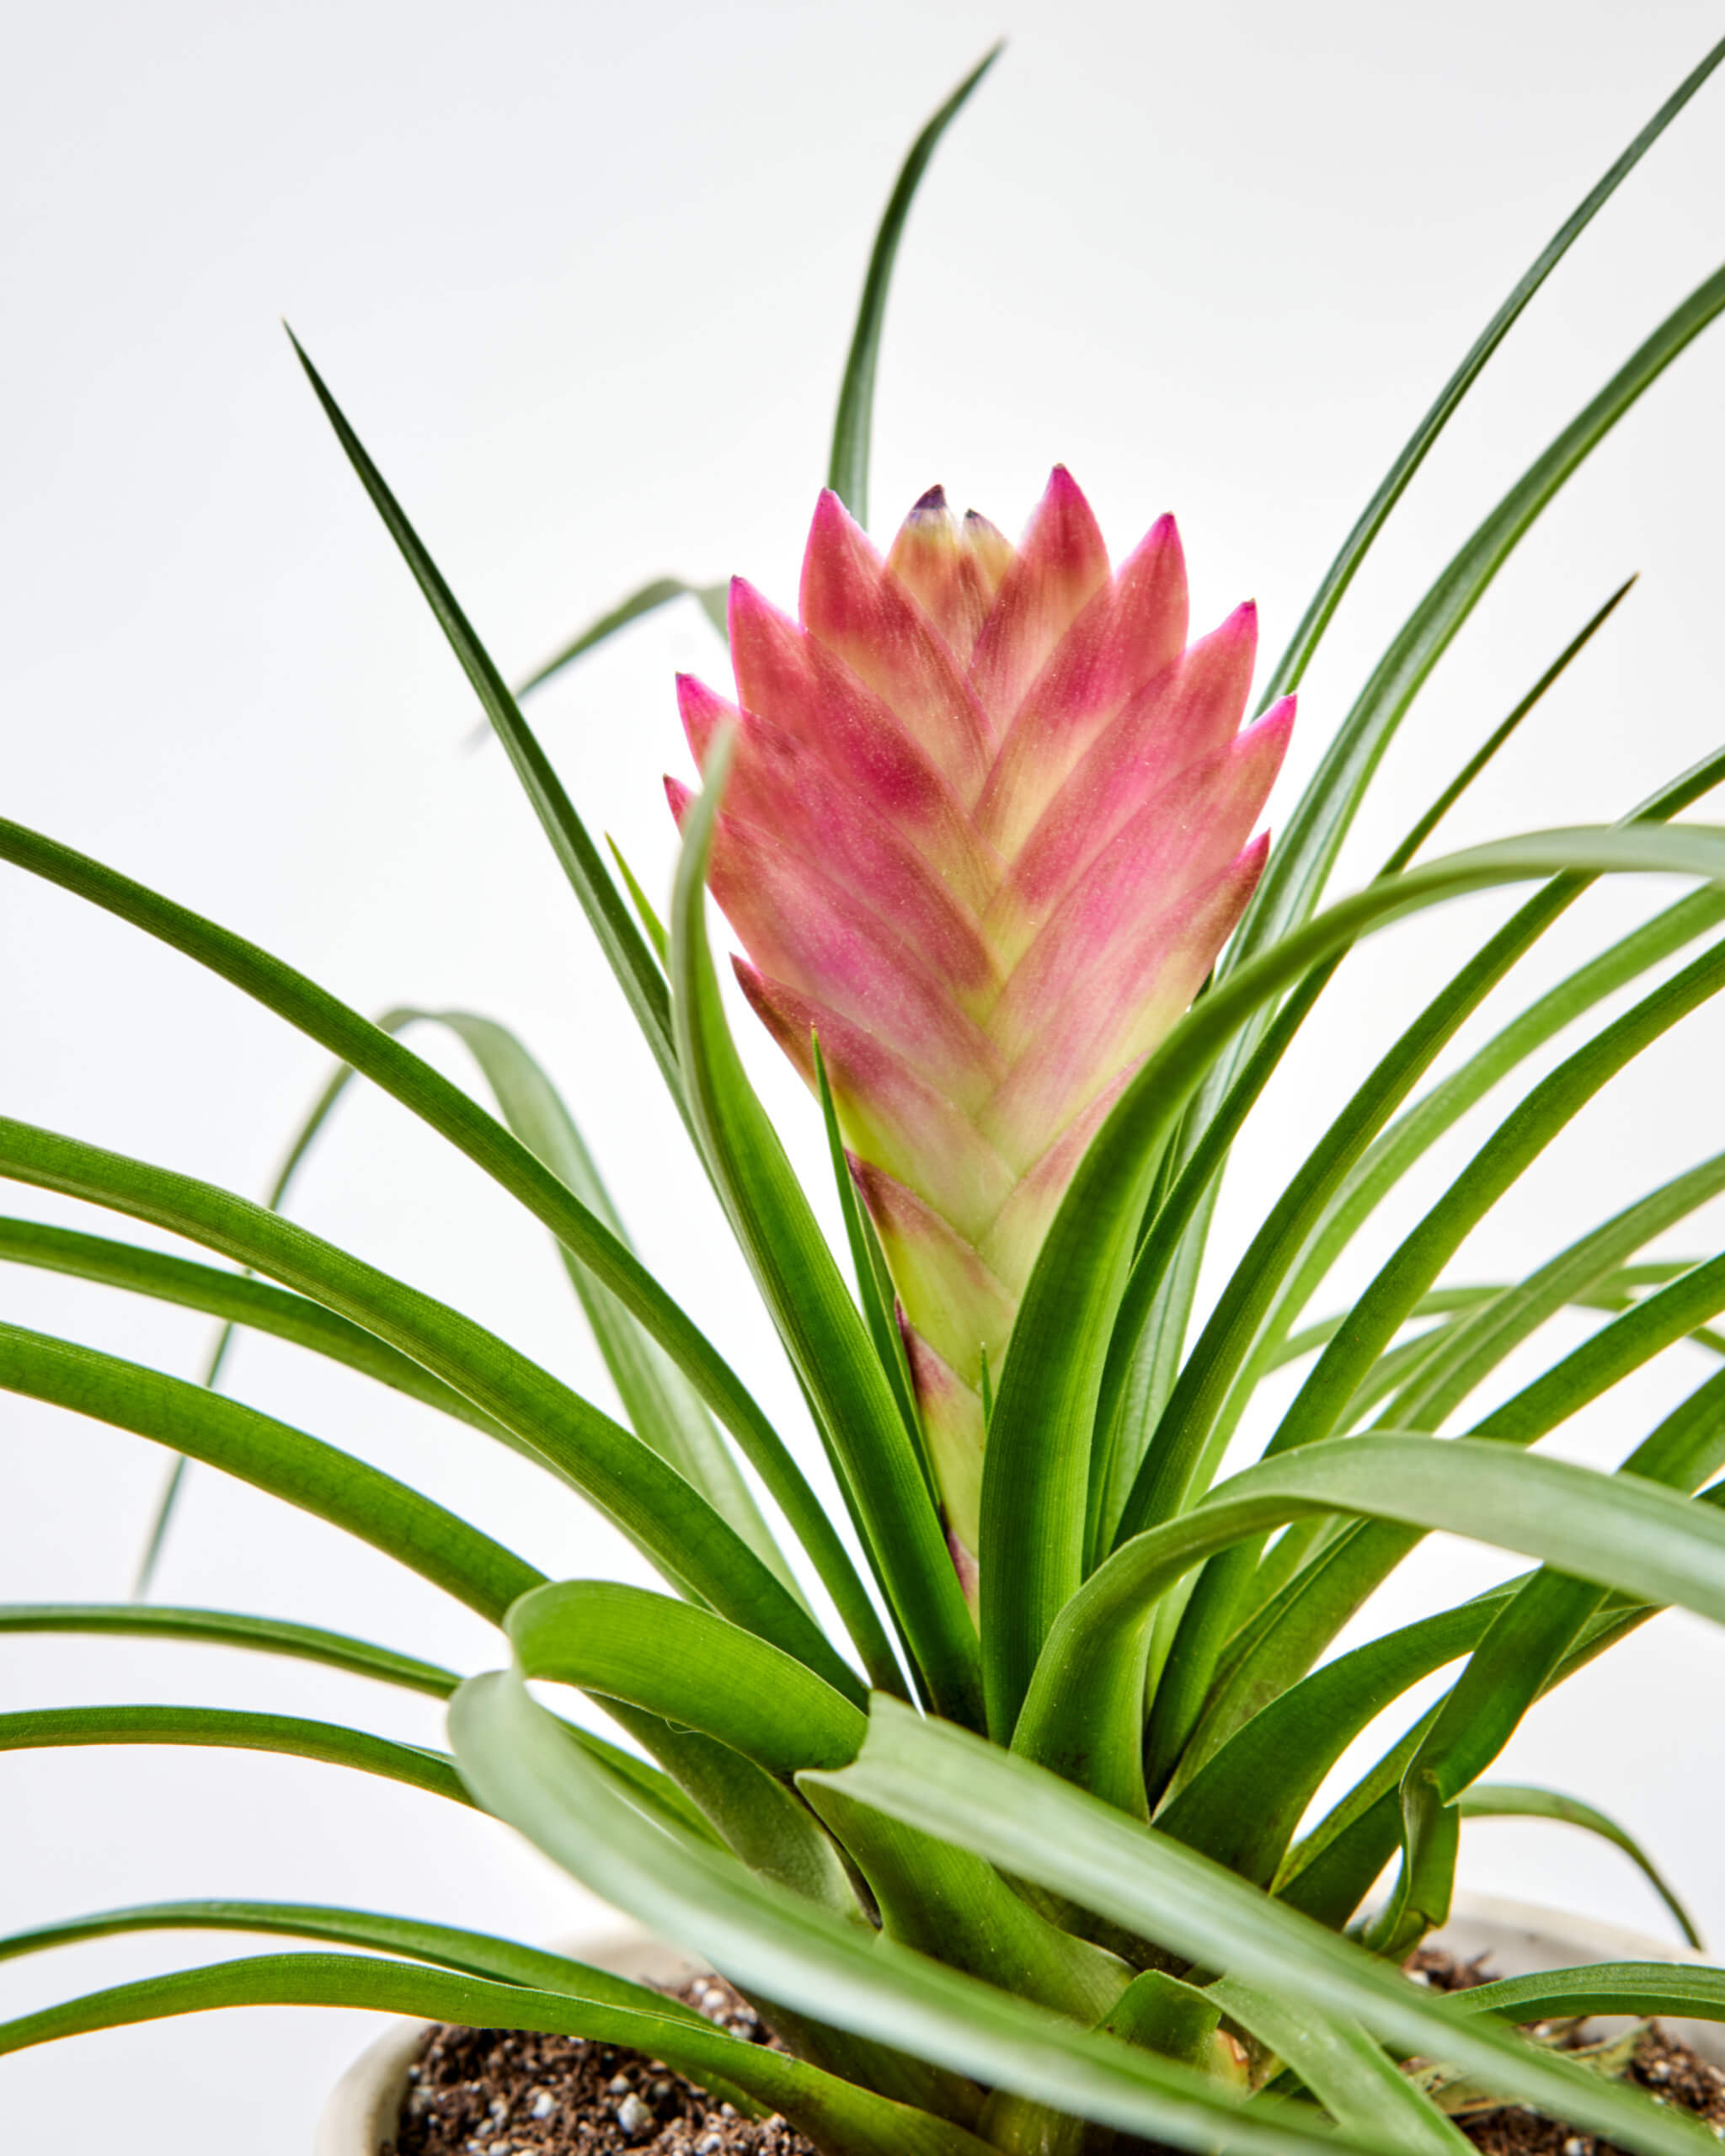 are bromeliad plants poisonous to dogs